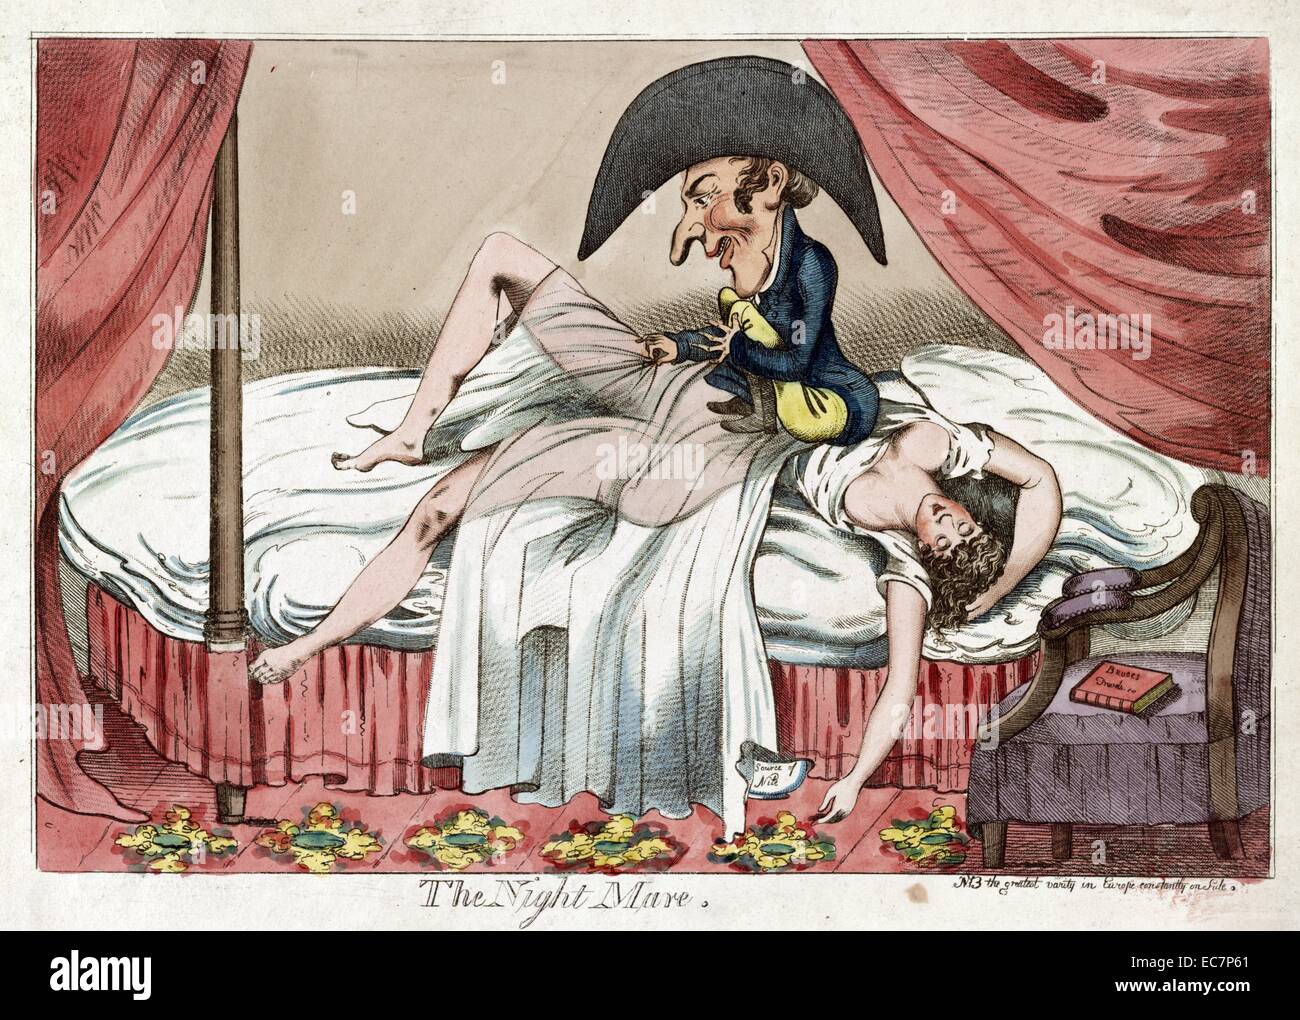 The night mare. Cartoon shows a scantily clad woman asleep on a bed, a little man sitting on her chest pulling back her see-through covers, as one of her arms hangs to the floor near a chamber pot (written on it: 'Source of Nile') and a book on a chair titled 'Bruces Travels.' Stock Photo